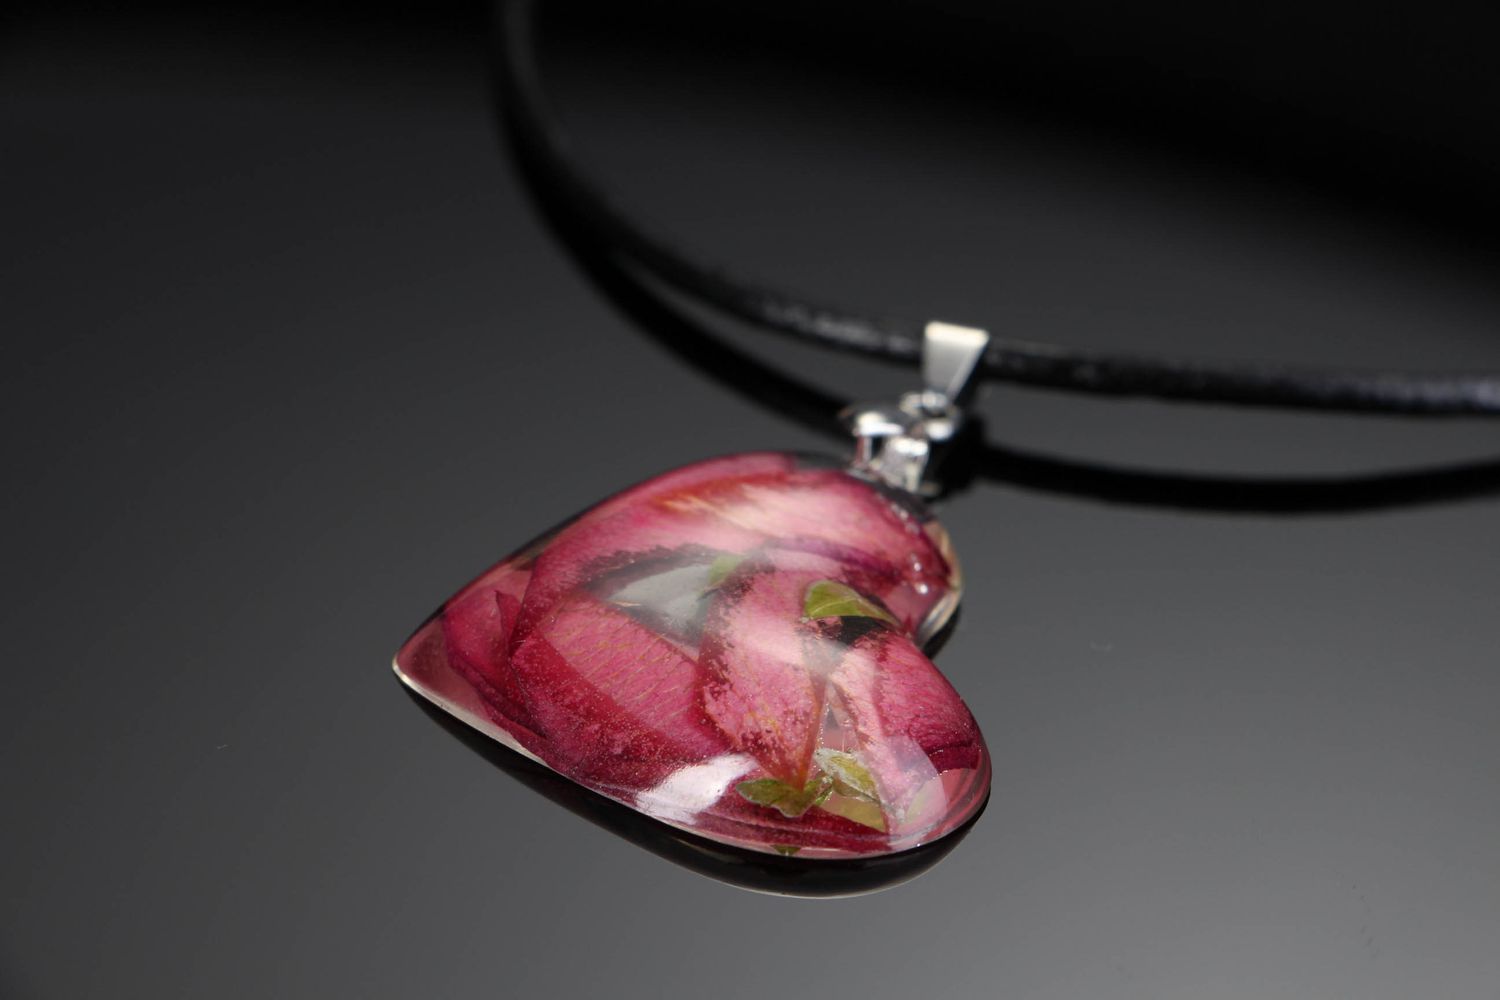 Pendant made from epoxy and rose petals photo 1